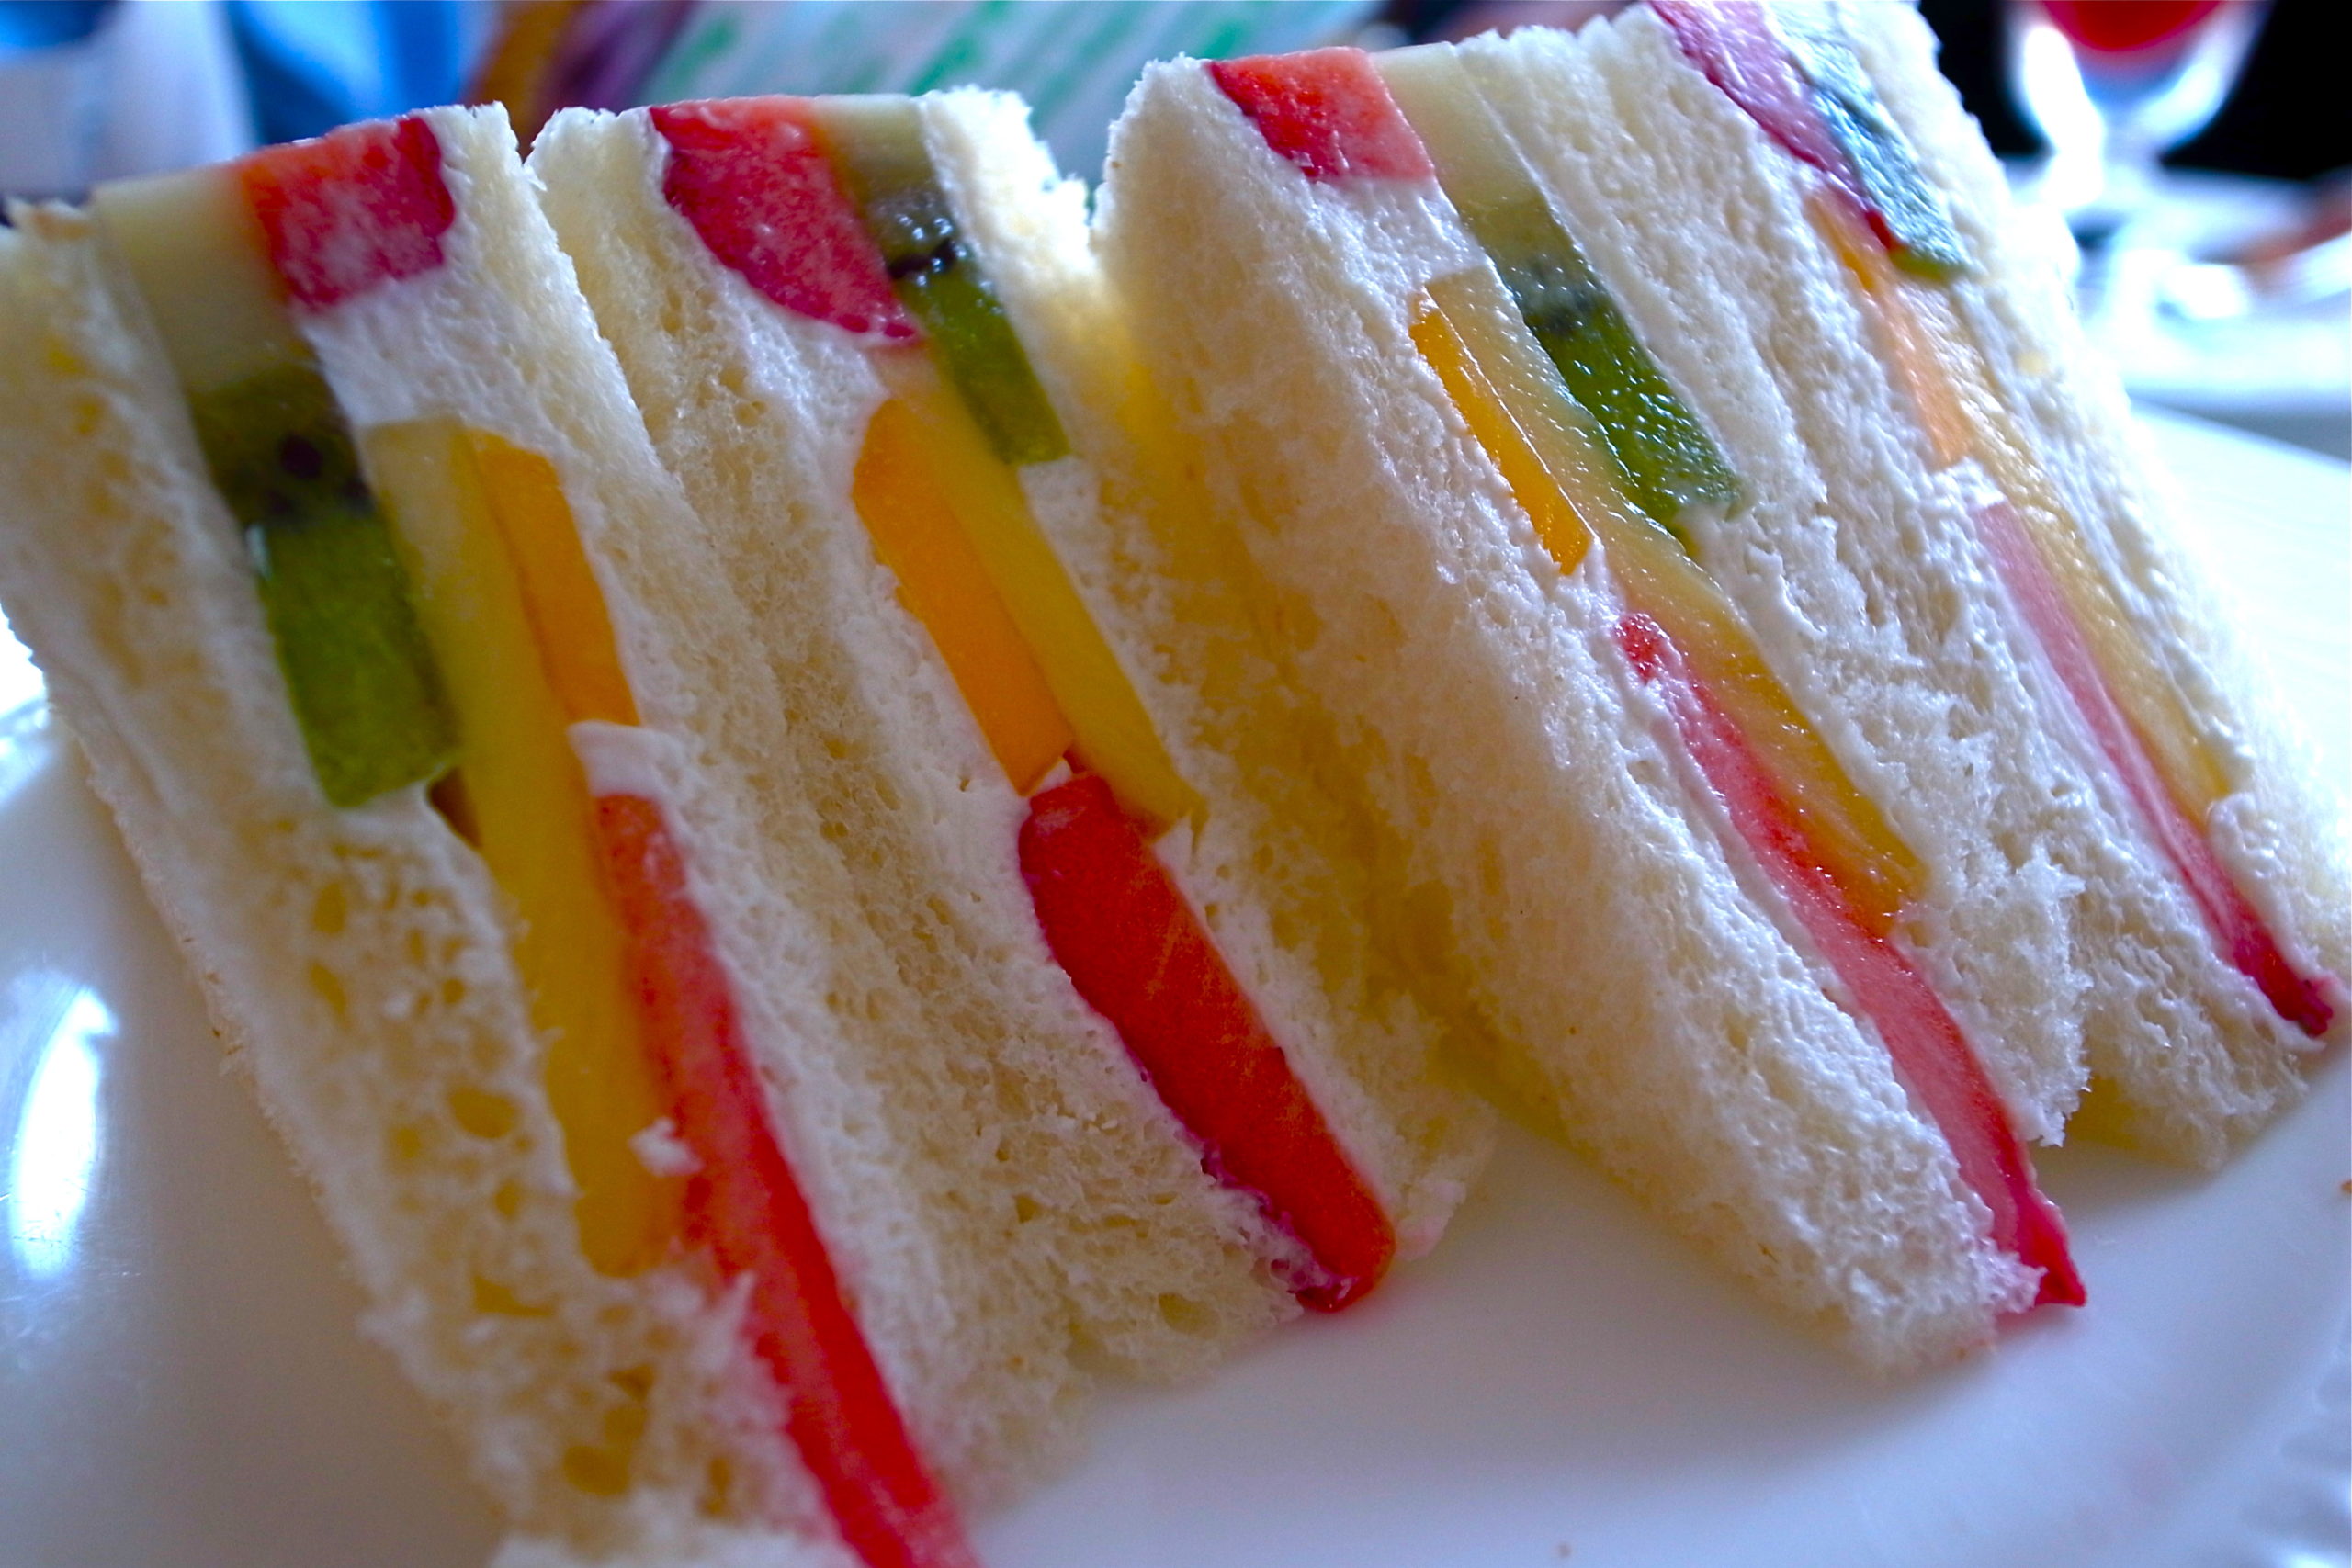 Fruitwiches